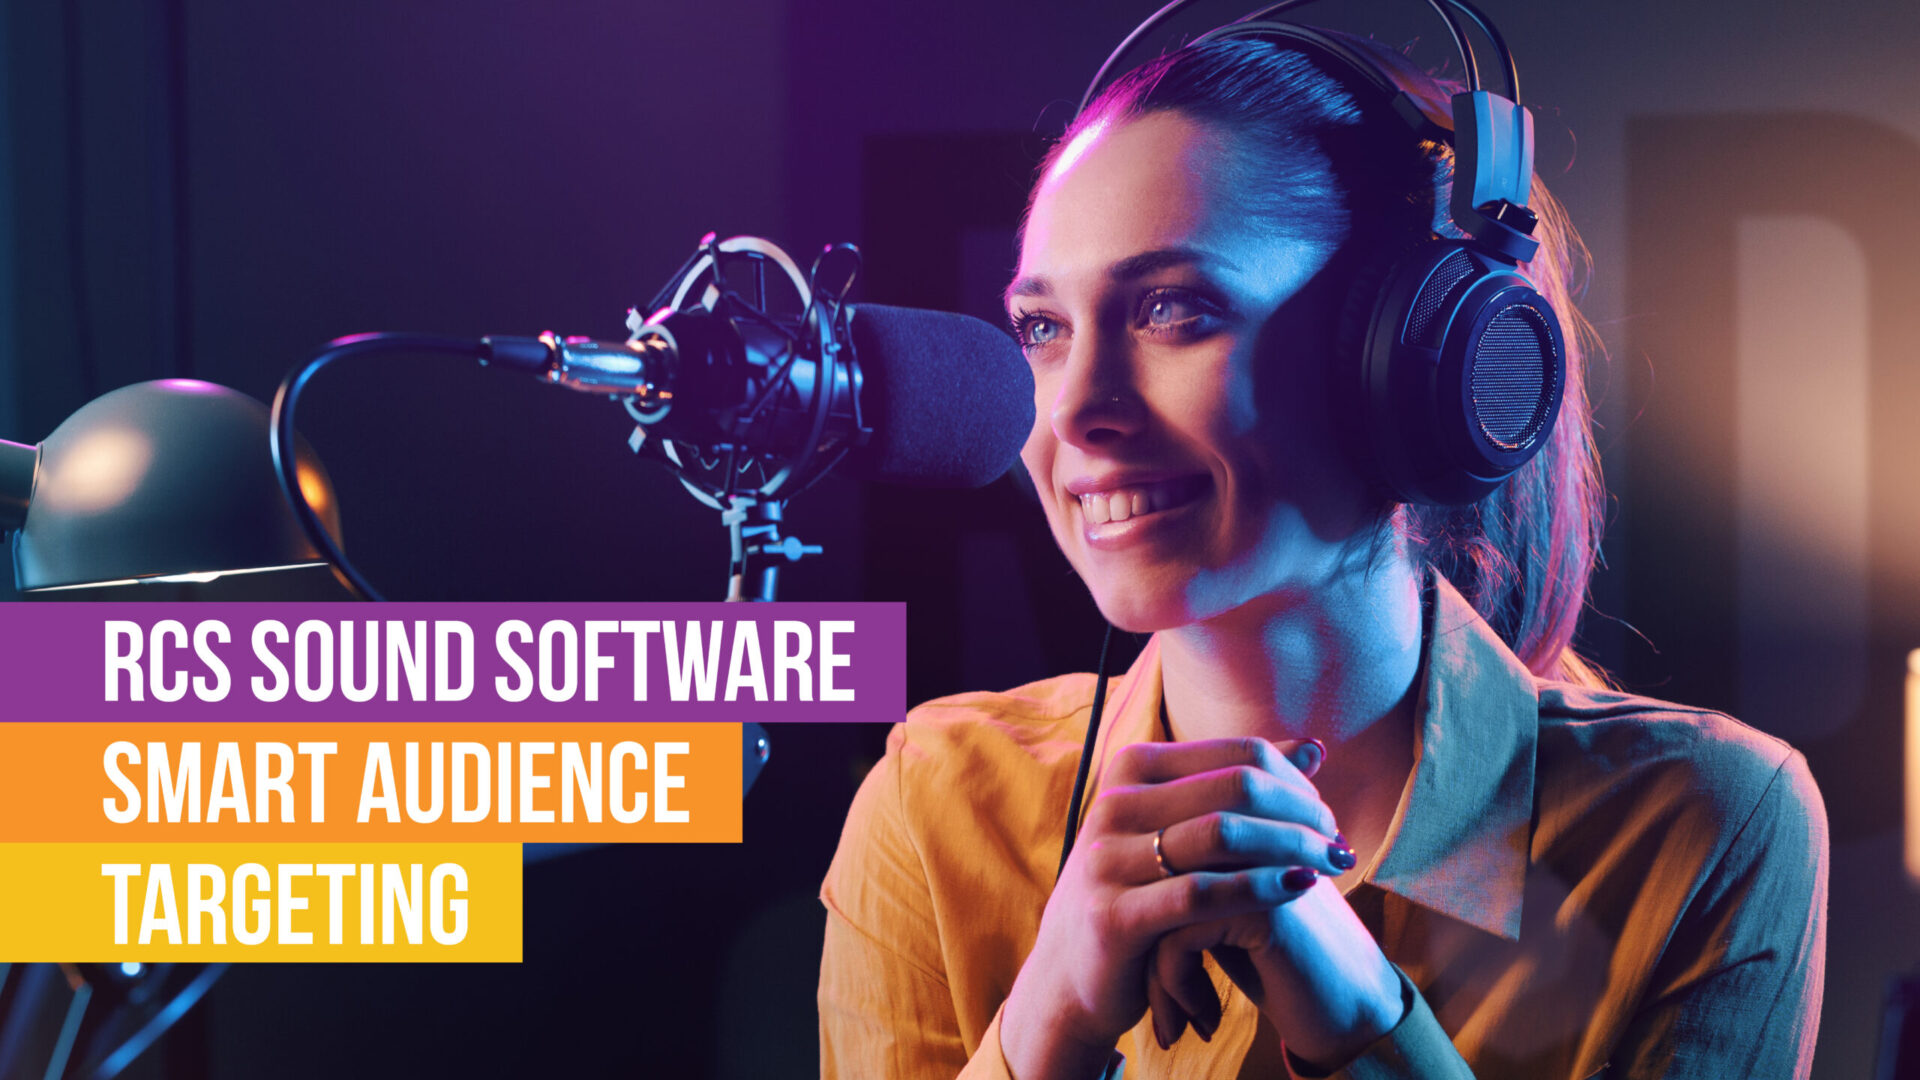 RCS Sound Software Smart Audience Targeting Grid